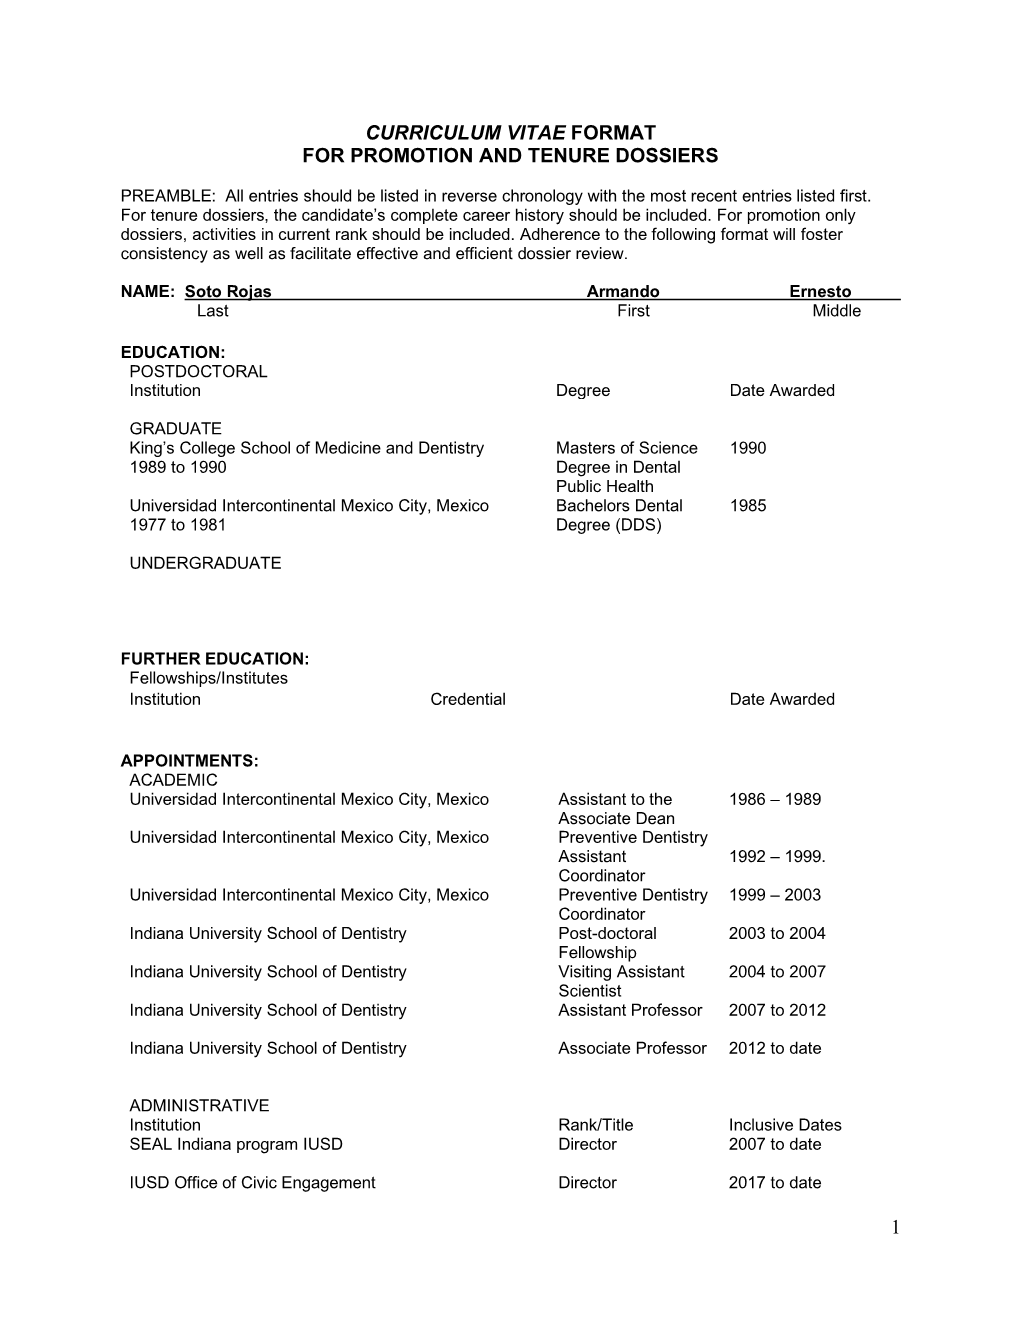 1 Curriculum Vitae Format for Promotion and Tenure